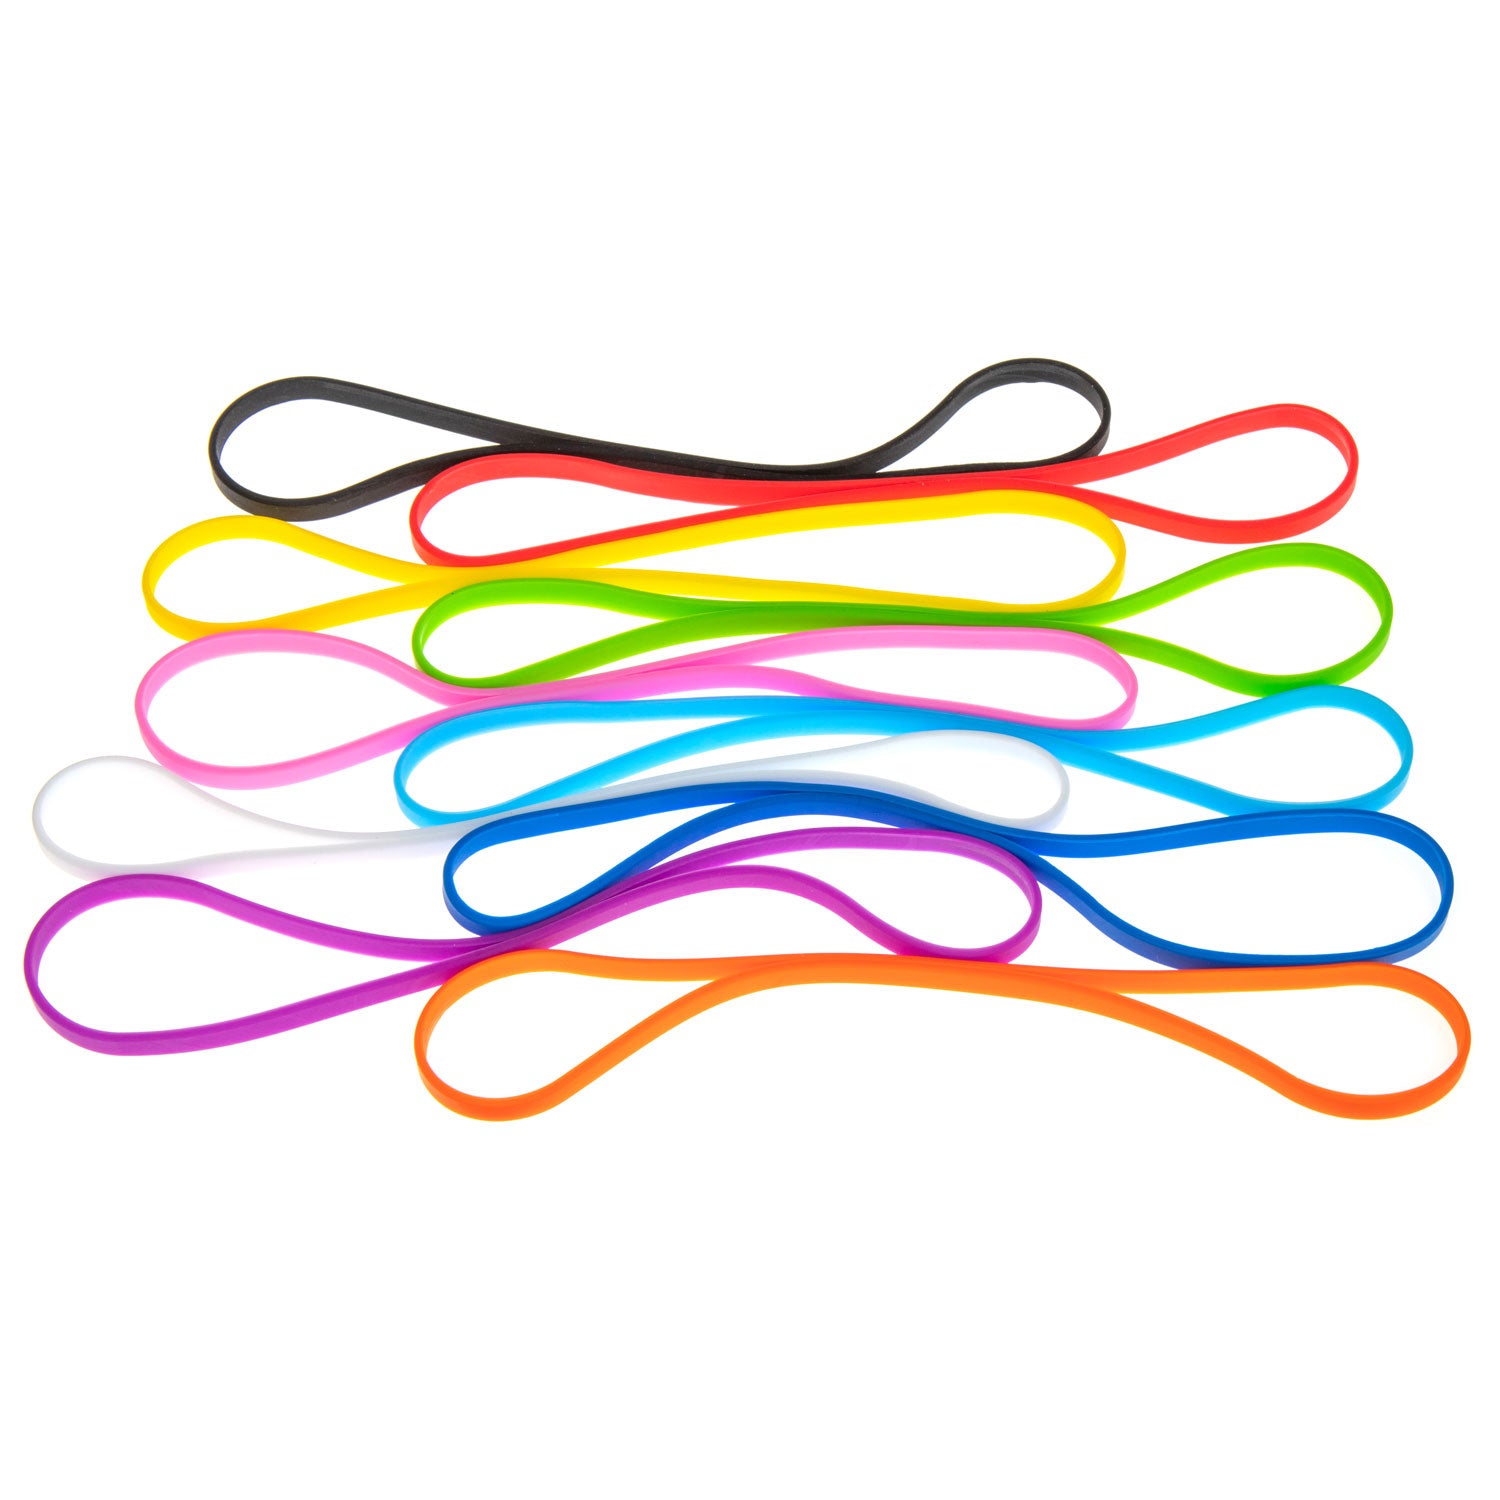 Grifiti Band Joes 9 x 0.25 inch Silicone Rubber Bands Cooking Game Board Boxes Laptops 10 Pack - Grifiti